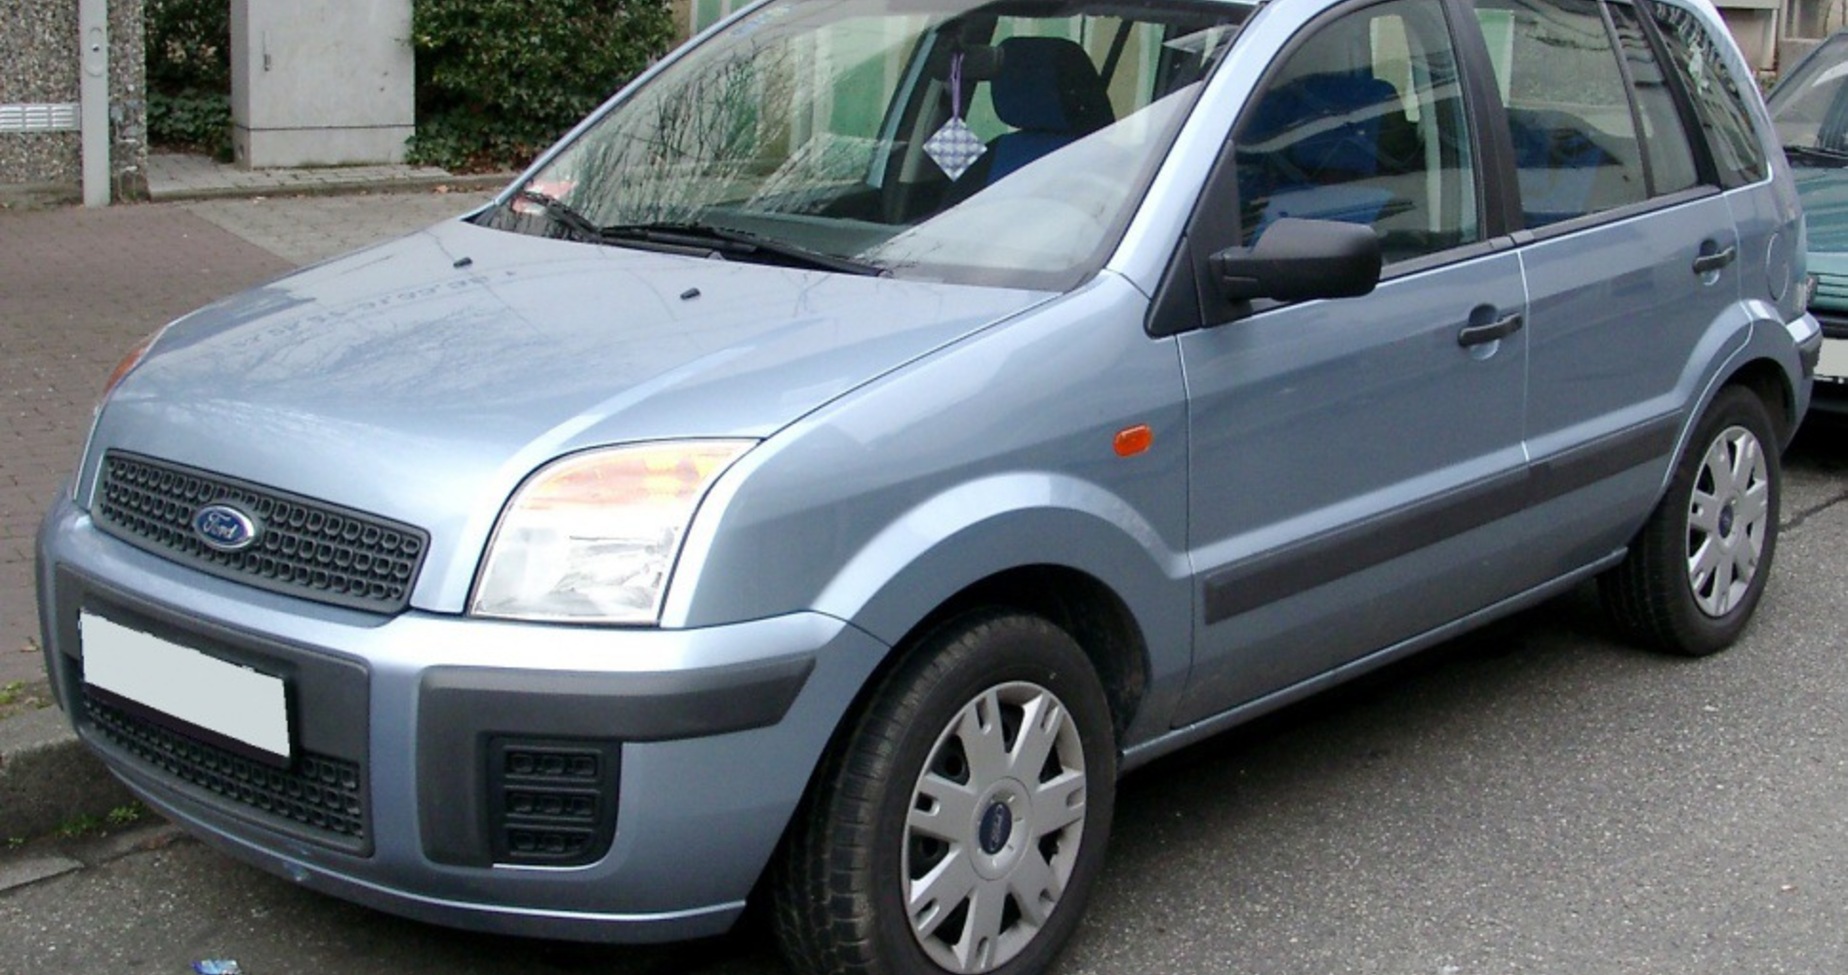 Ford Fusion I (facelift 2005) 1.4 (80 Hp) Automatic 2005, 2006, 2007, 2008, 2009, 2010, 2011, 2012 